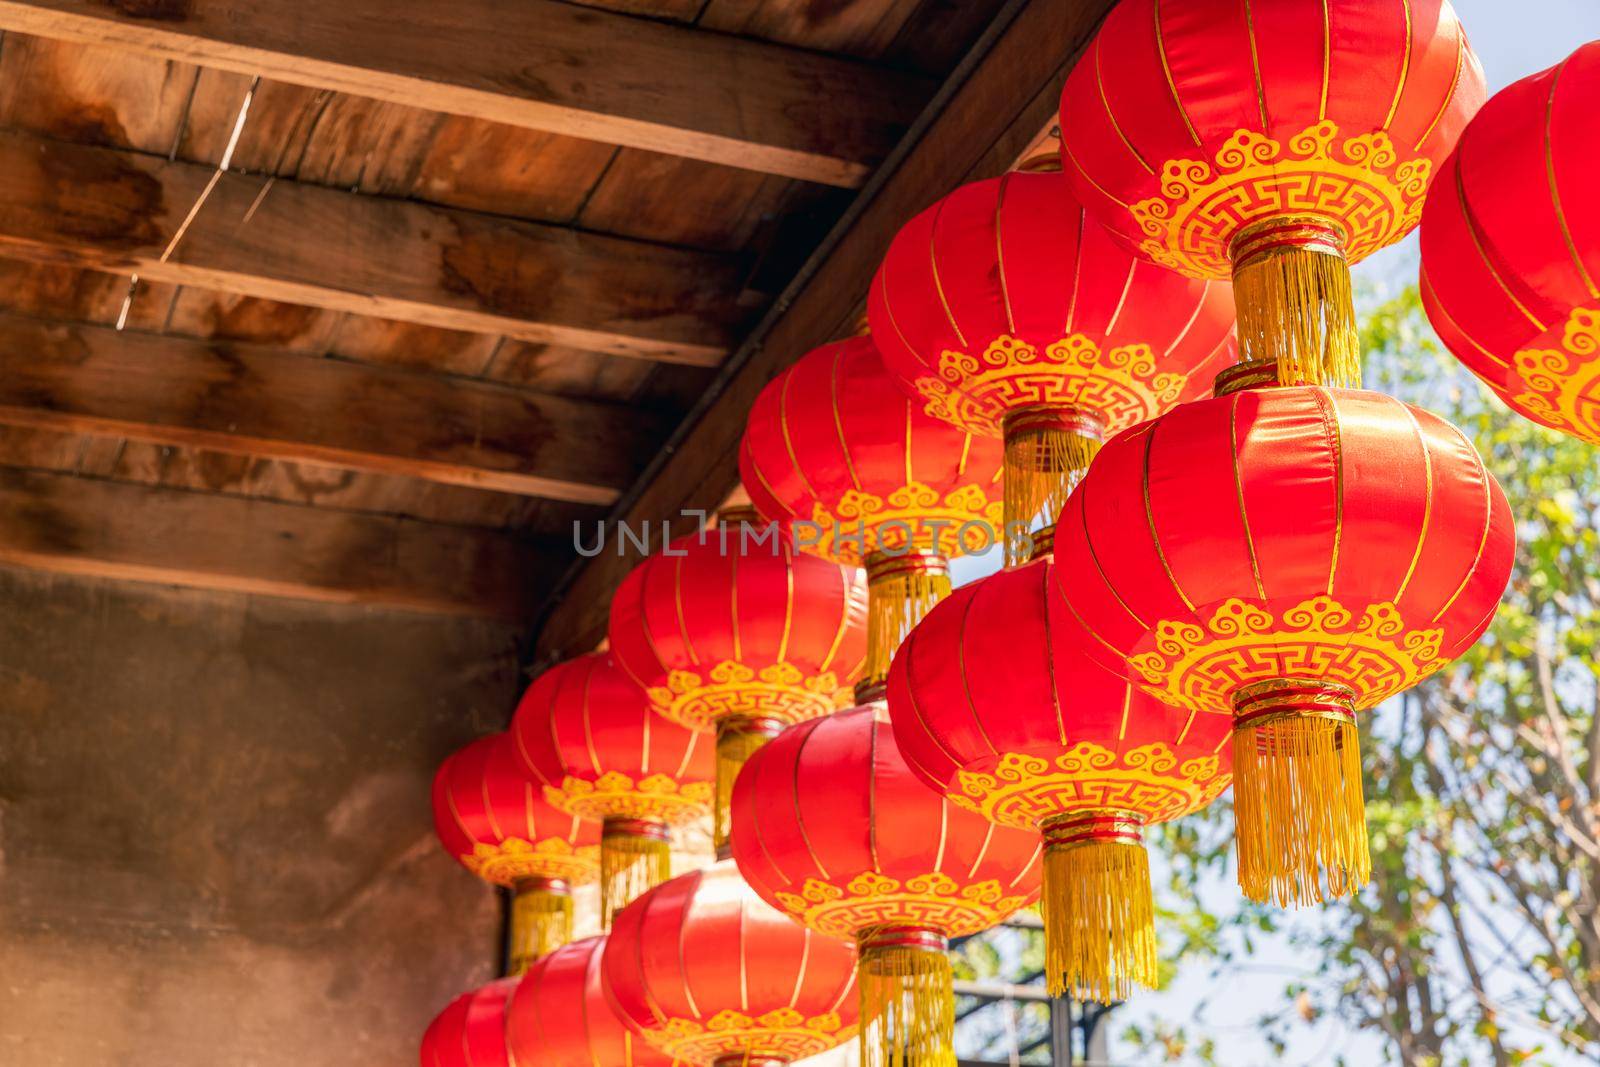 Chinese lanterns in china town area.